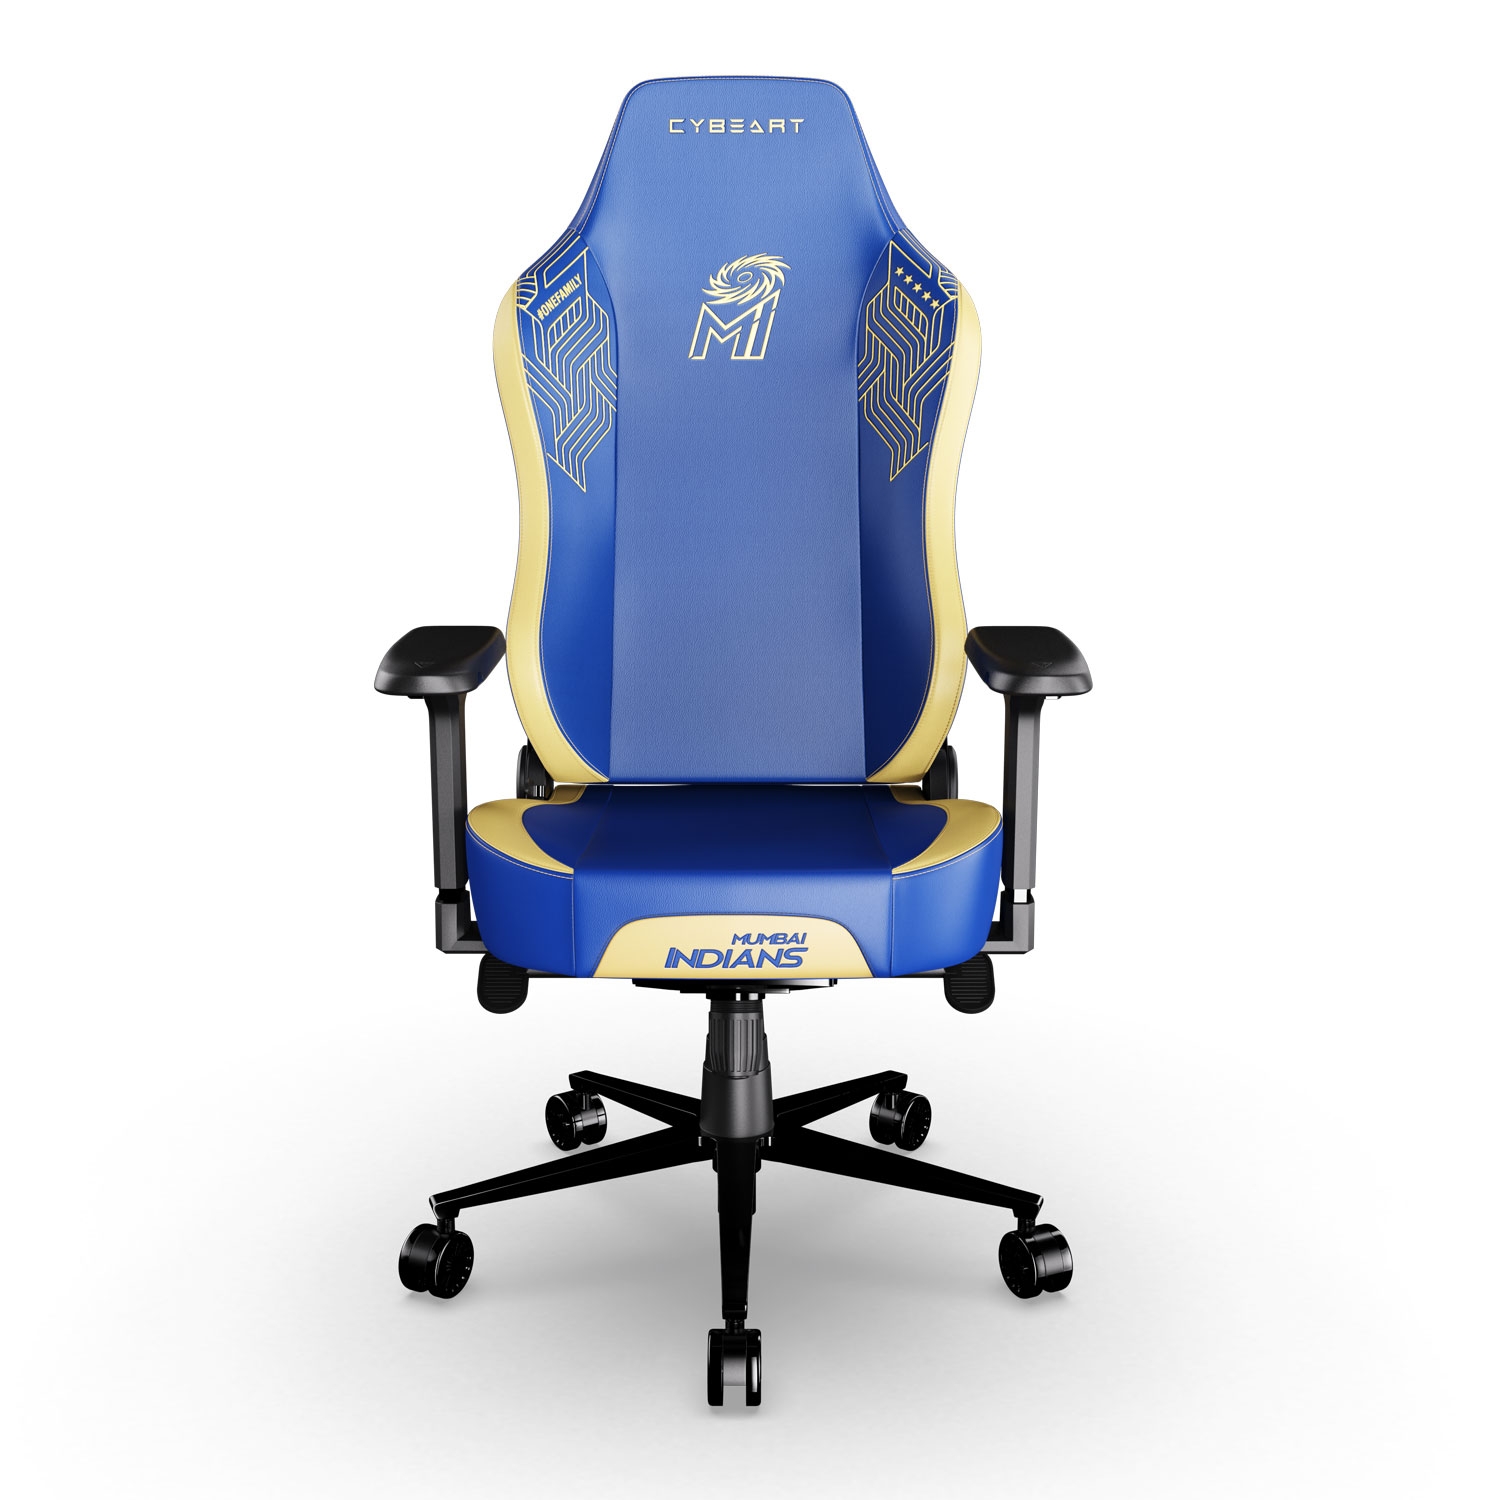 Cybeart | MI: Gaming Chair - Limited Edition (Pre-Order)